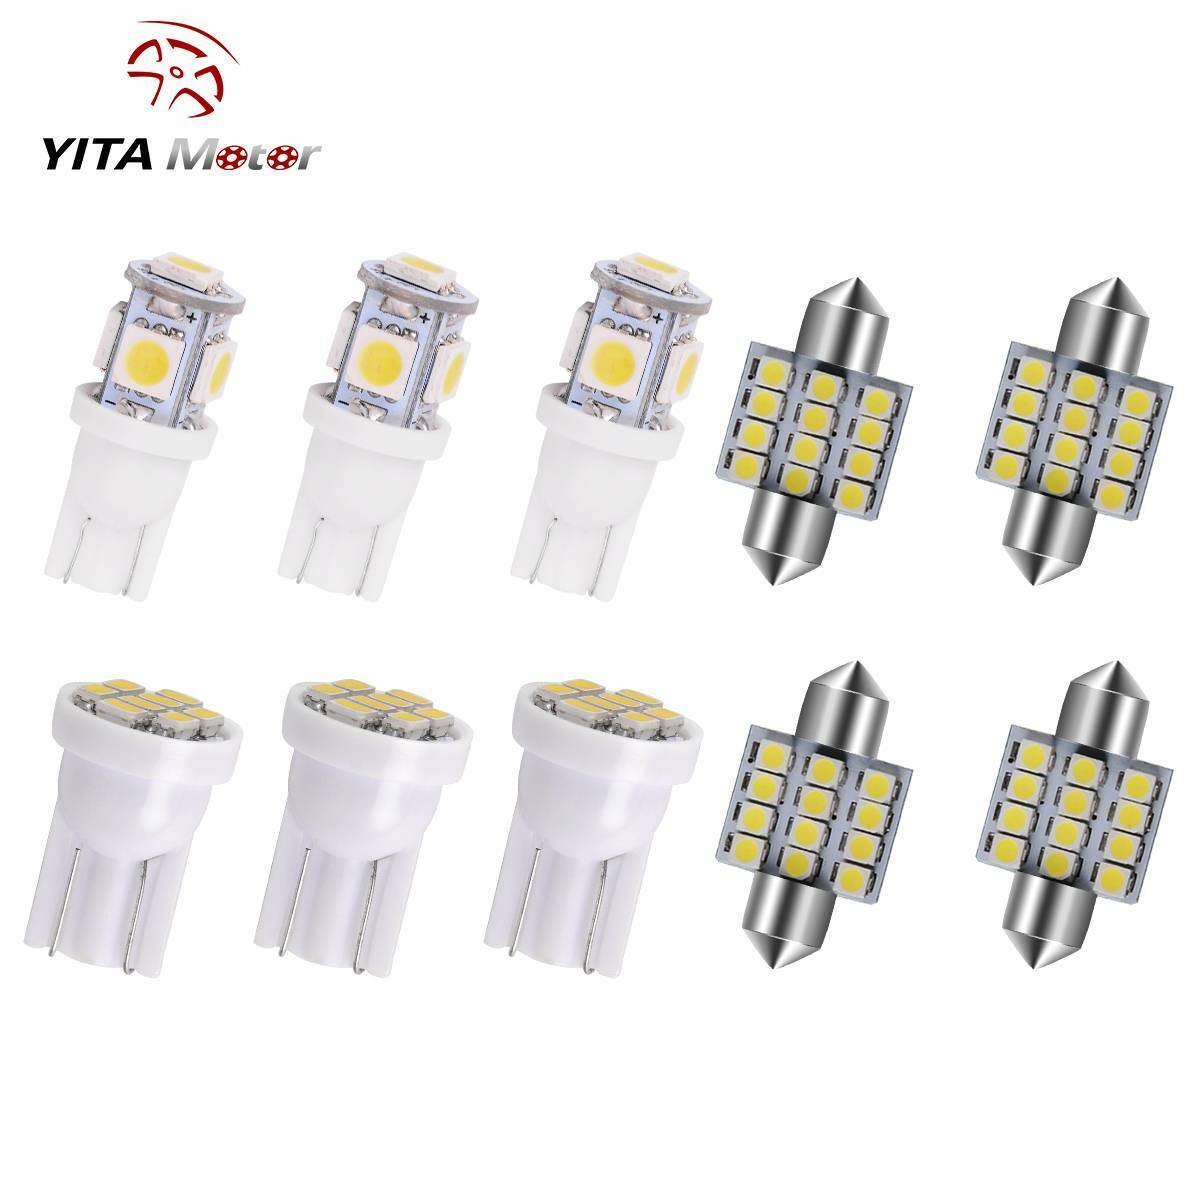 YITAMOTOR White T10 31mm LED Interior Package Kit Map Dome License Light Bulbs